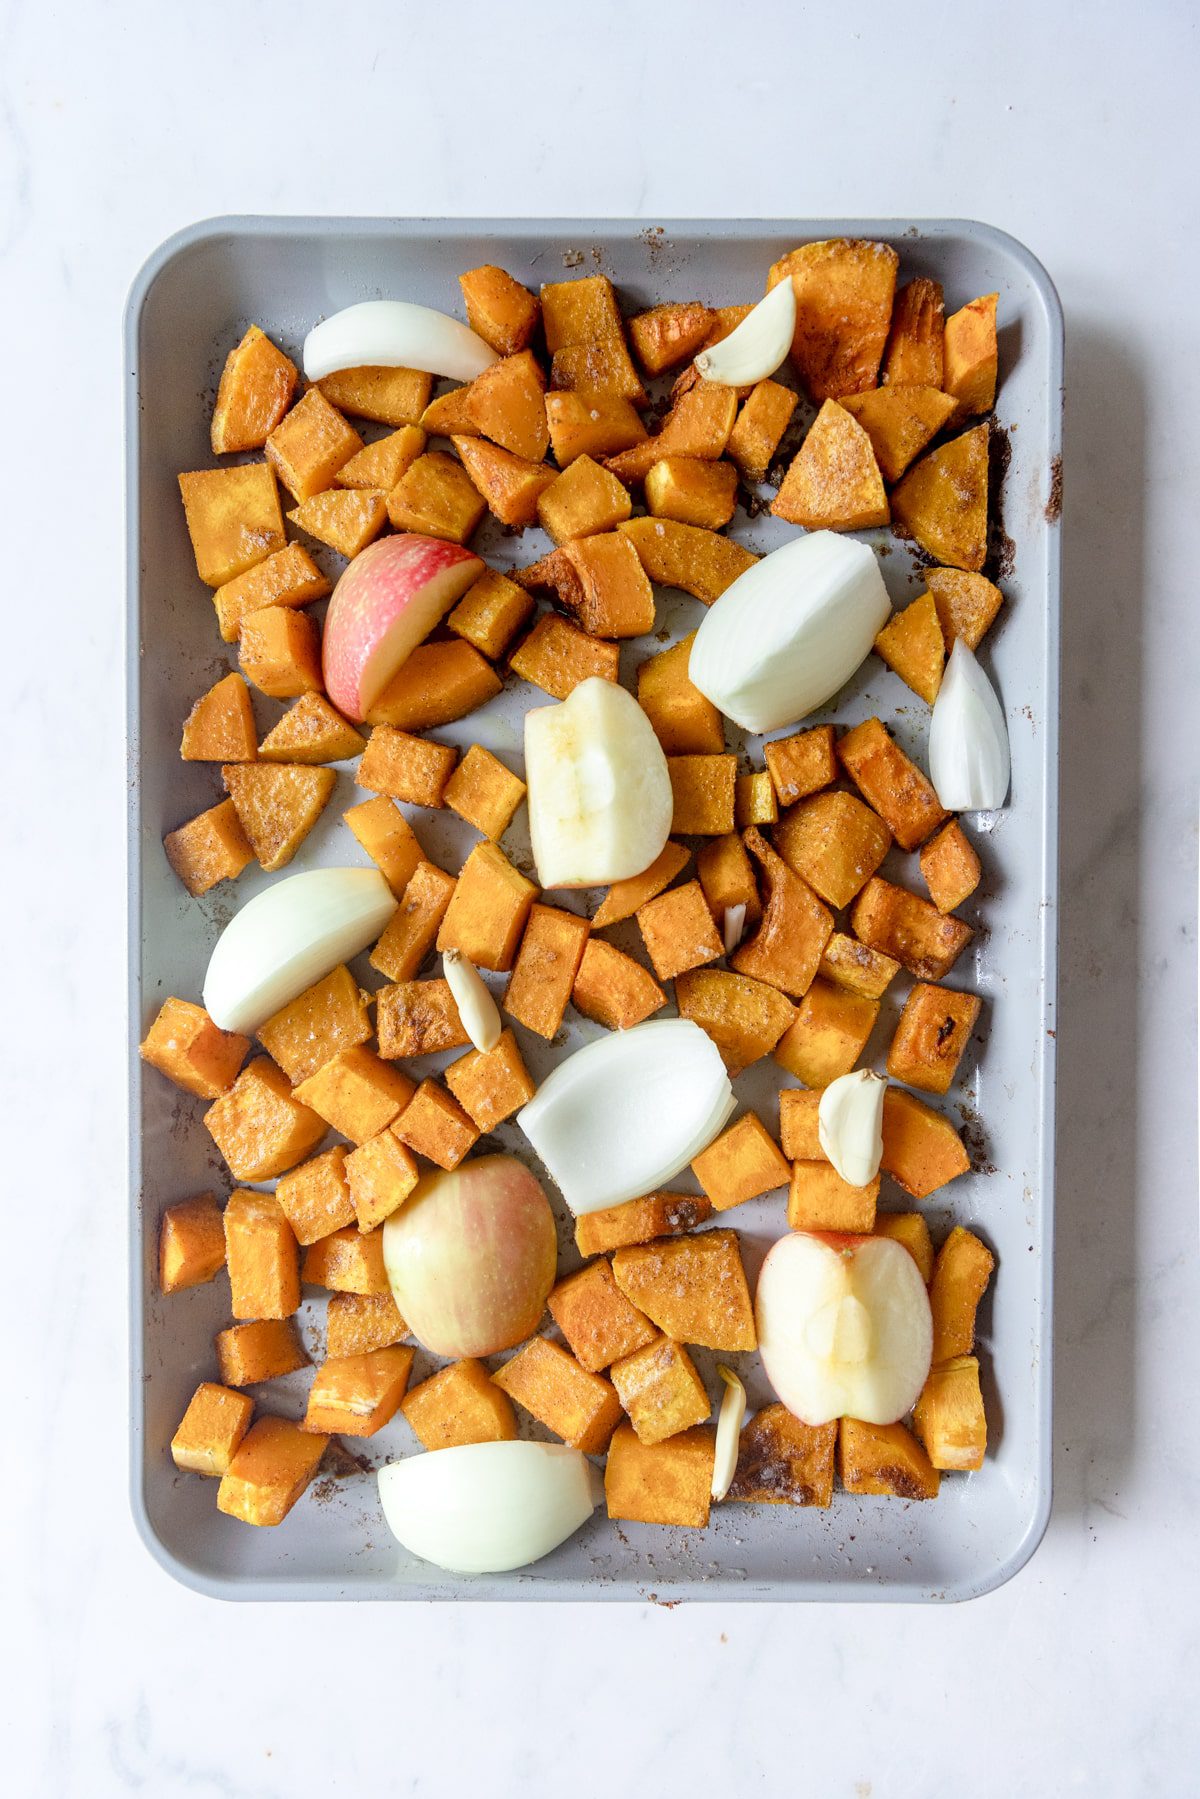 apples, onions, and garlic added to diced roasted butternut squash on a sheet tray.